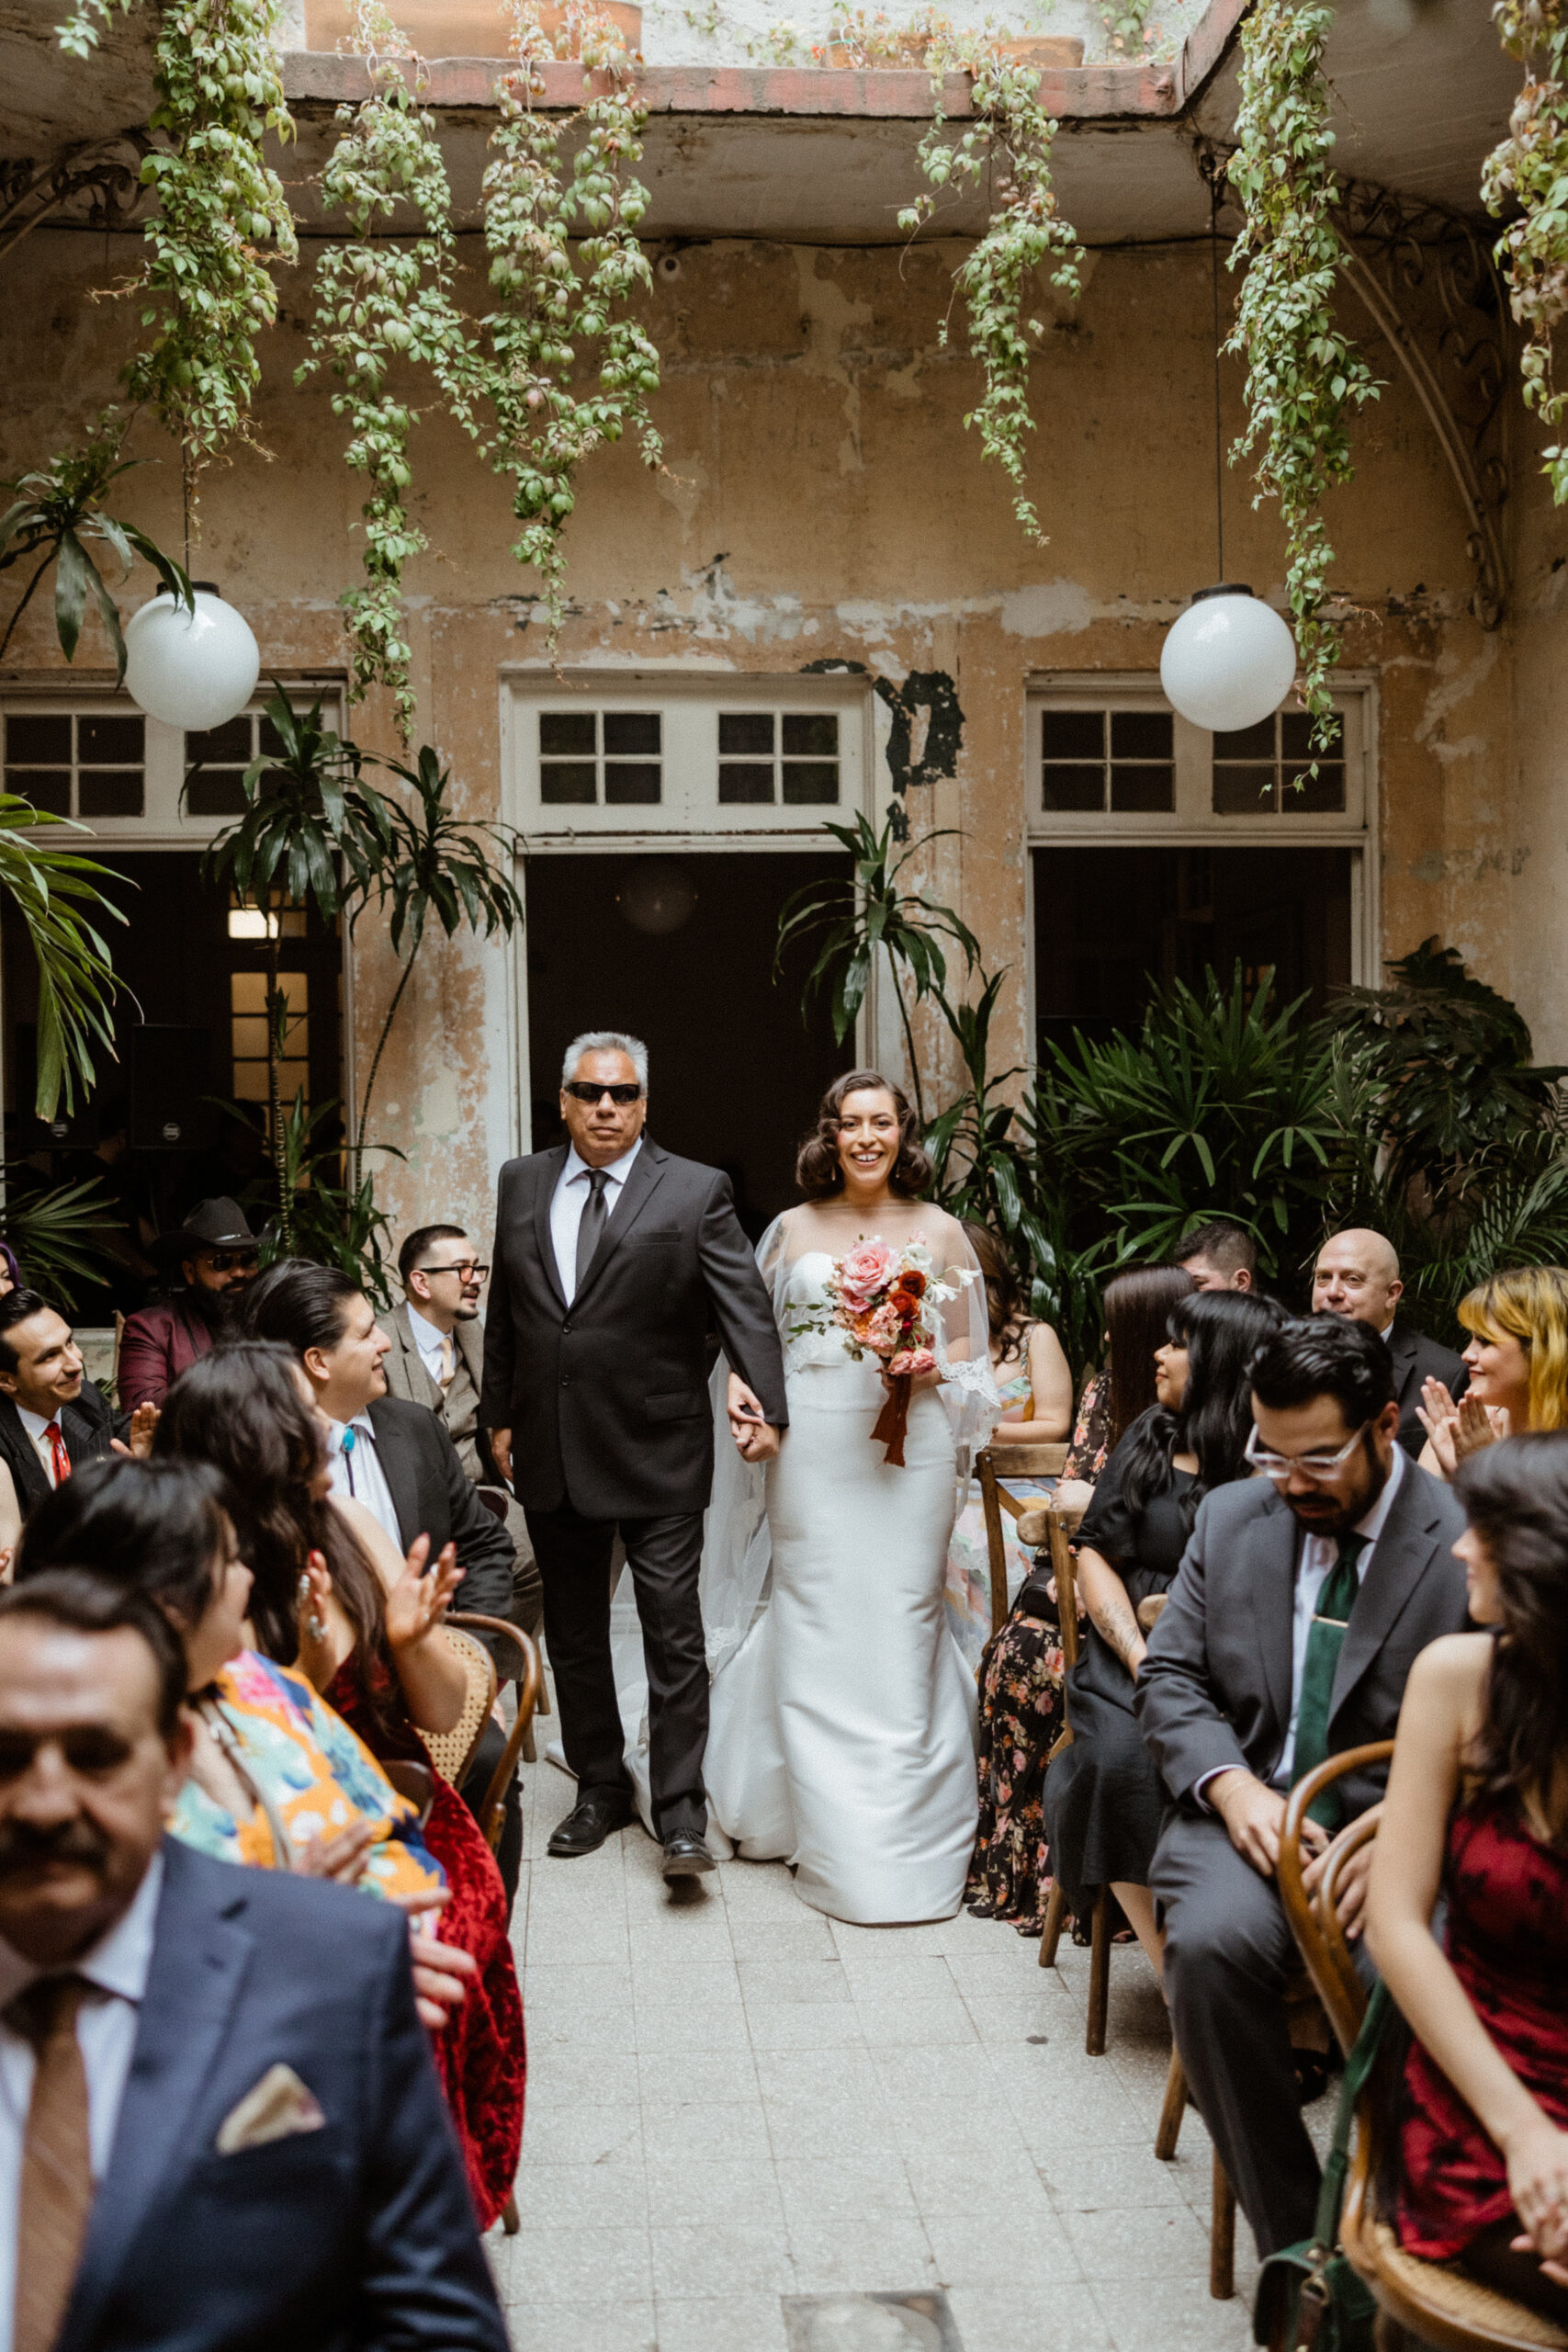 The stunning bride walks down the aisle with her father